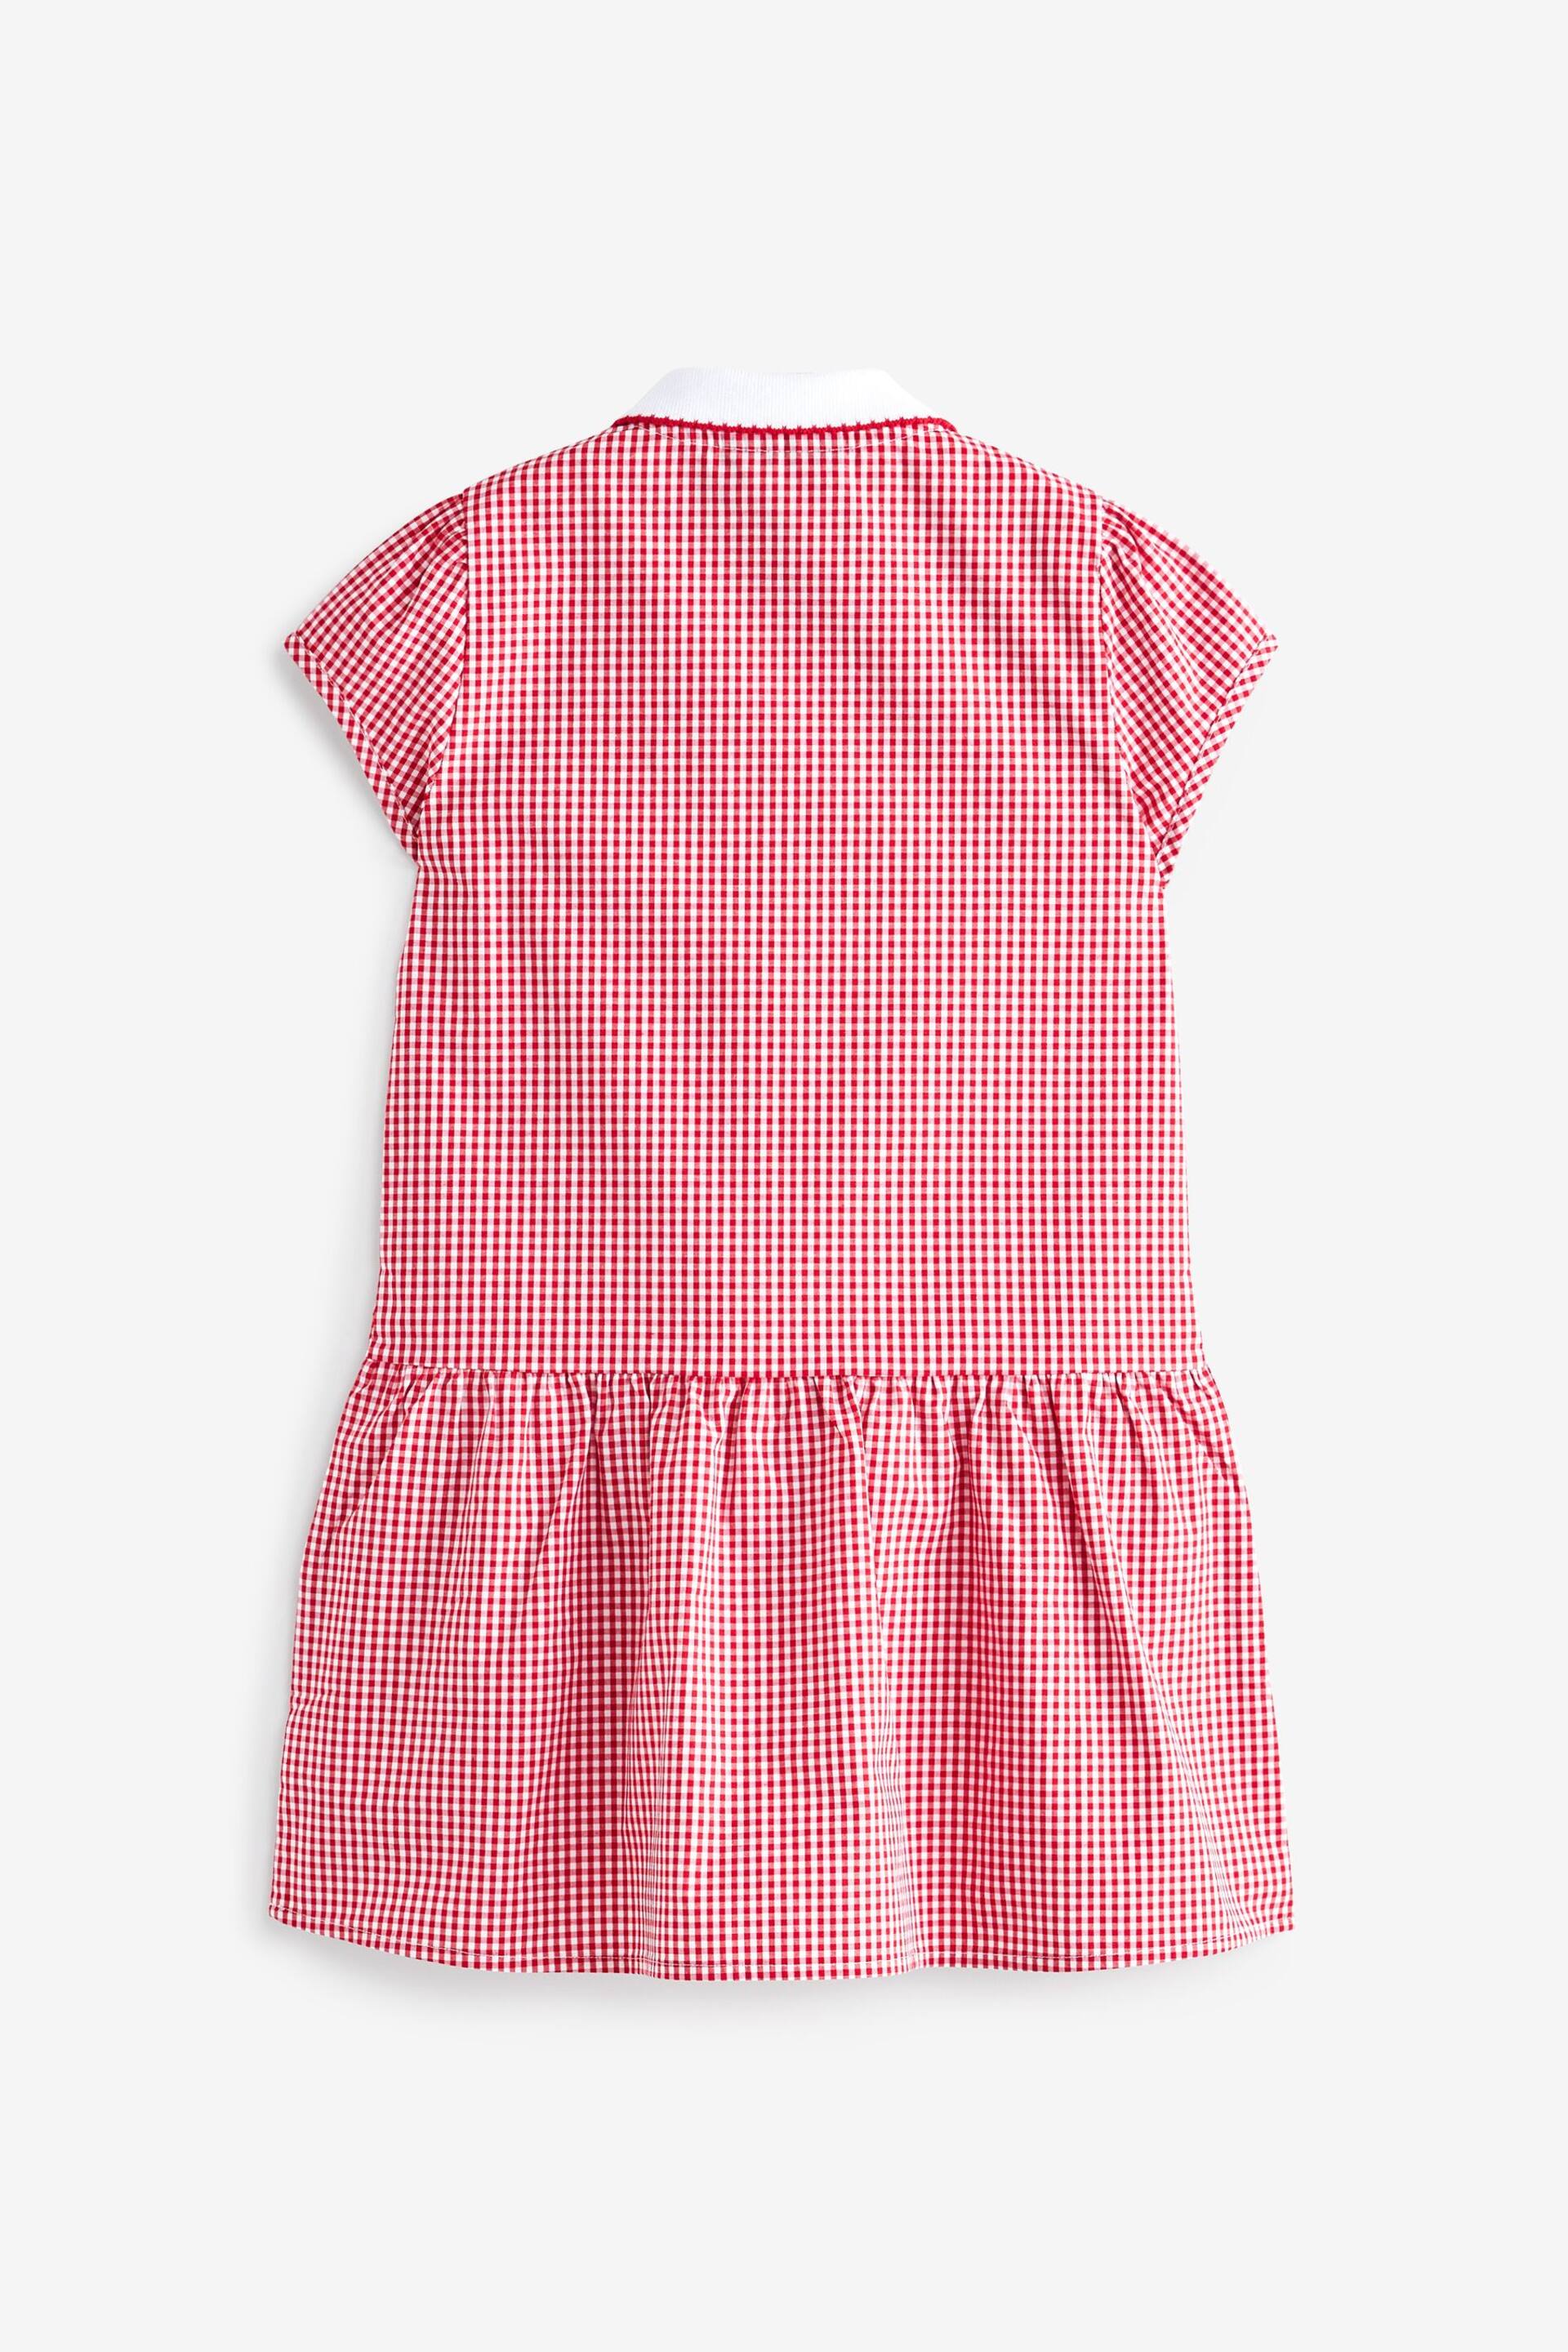 Red Cotton Rich School Gingham Zip Dress (3-14yrs) - Image 5 of 6